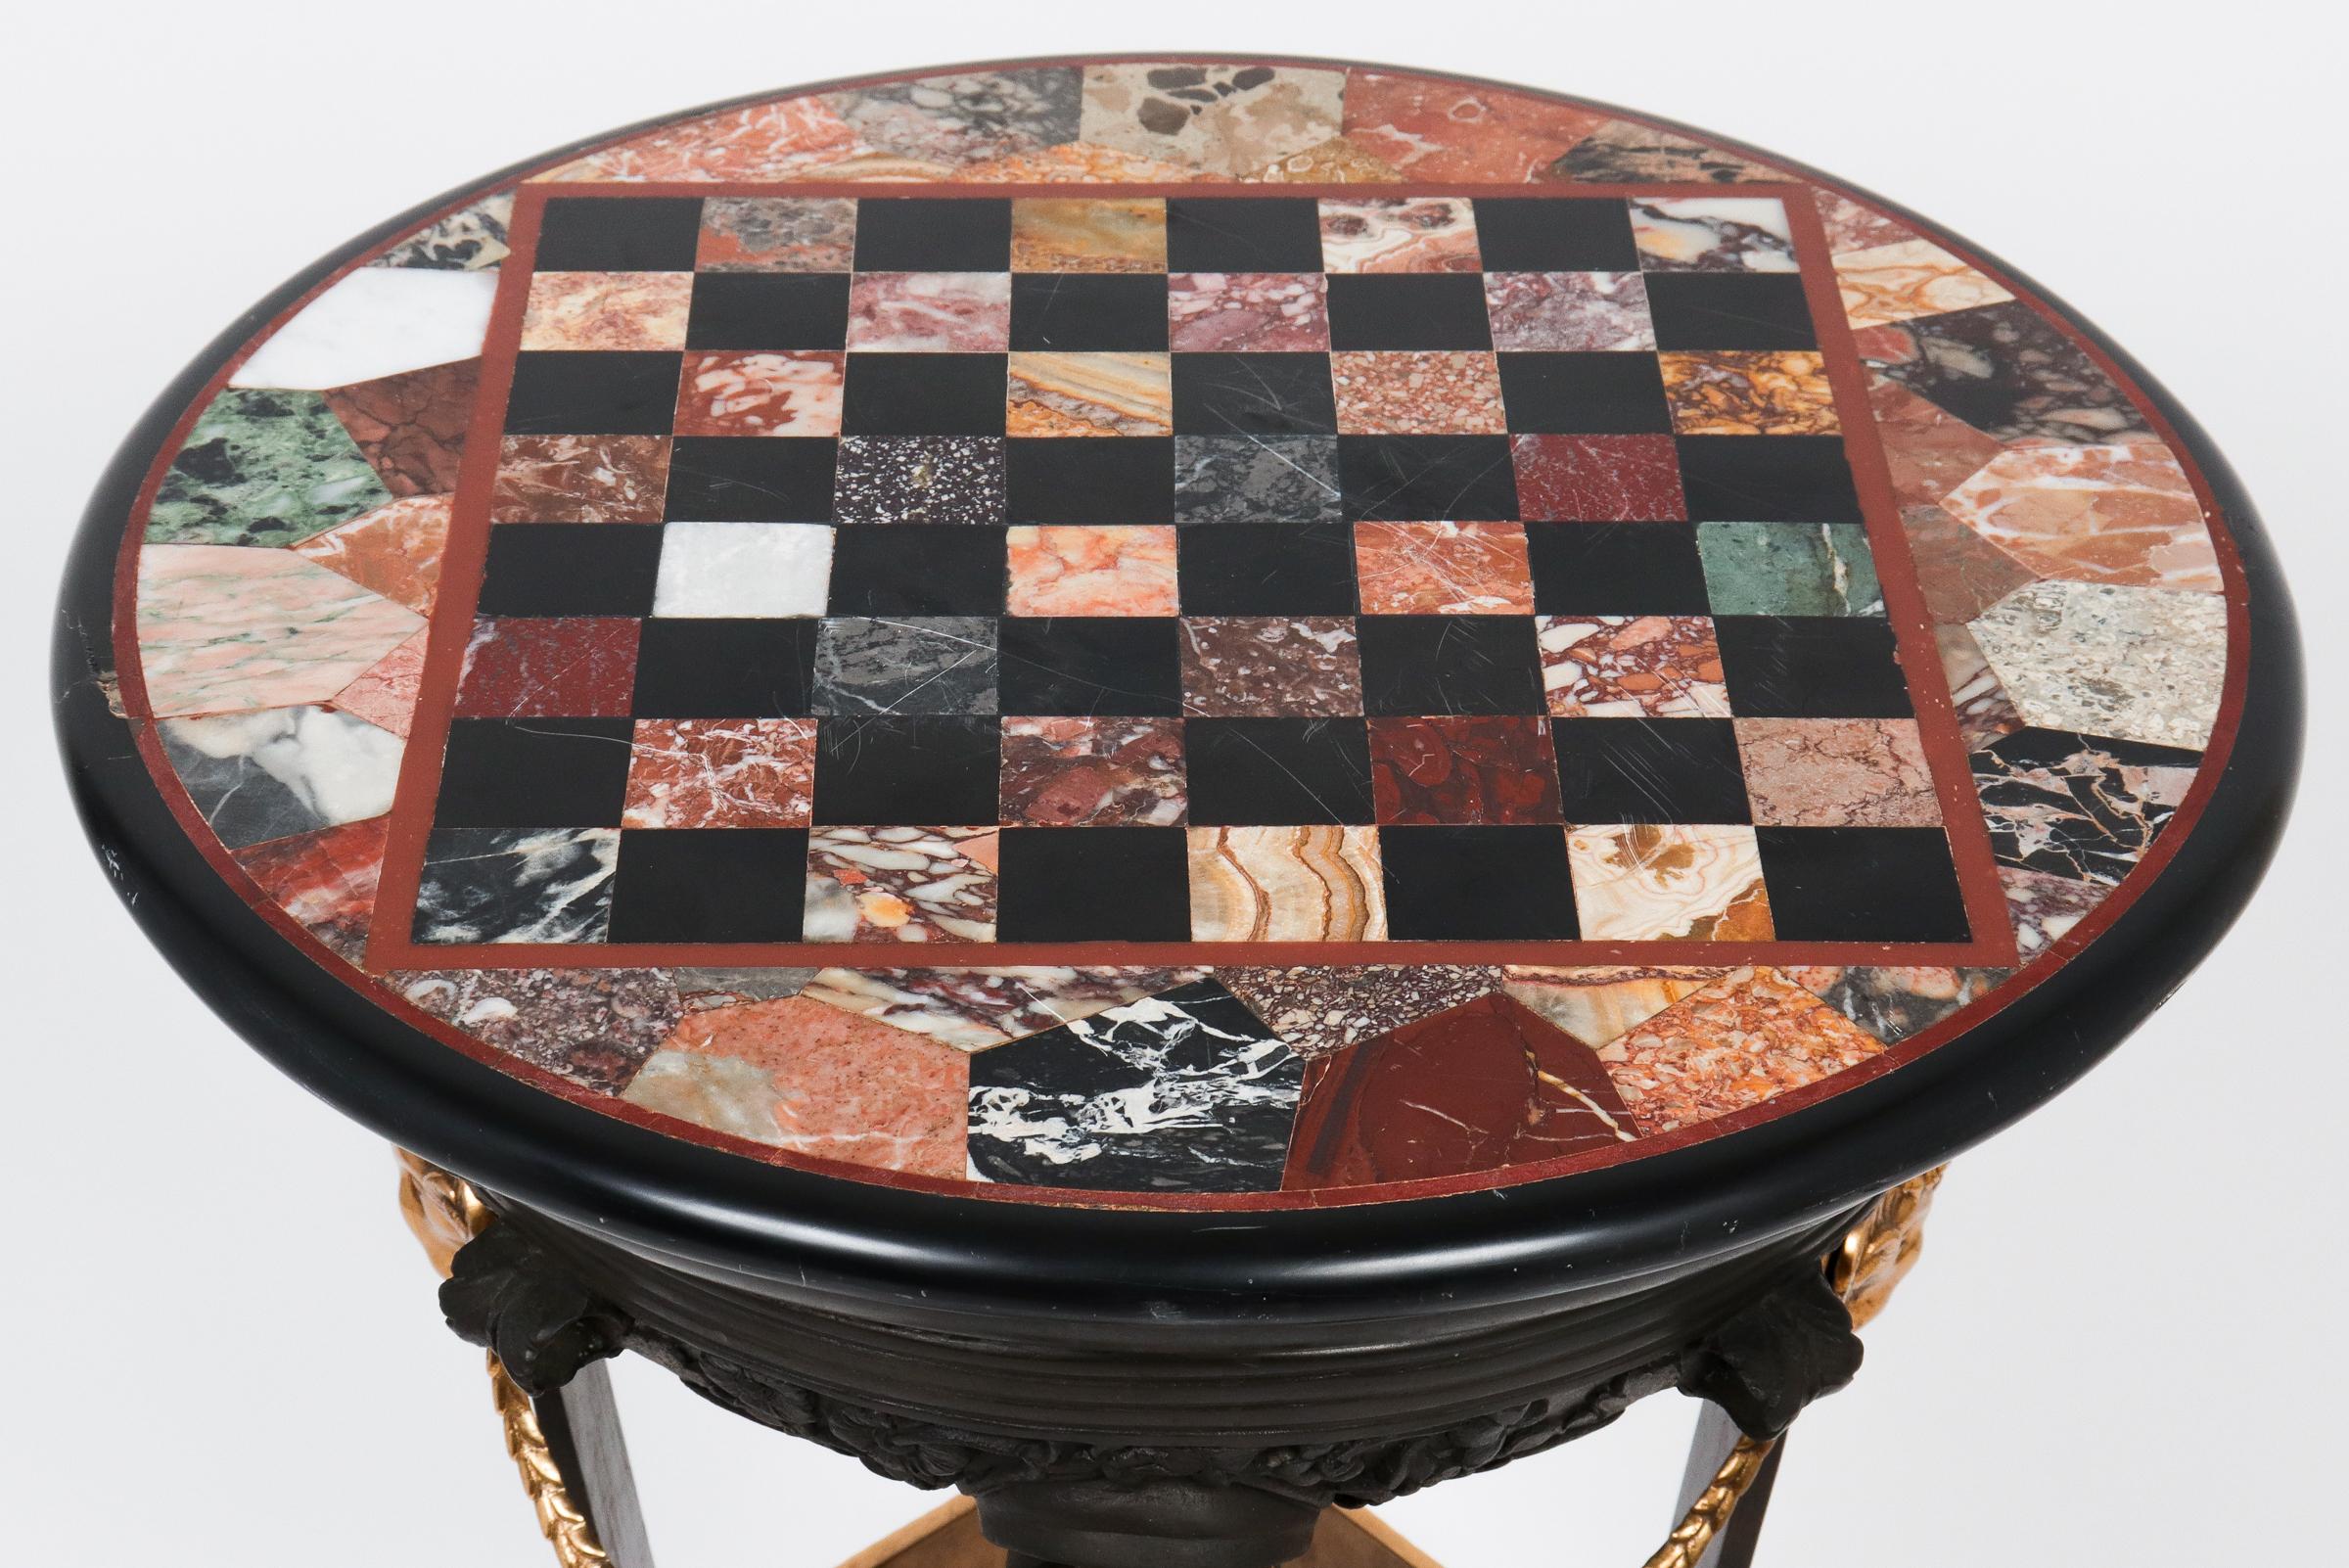 Empire style Grand Tour bronze gueridon or pedestal table with a circular pietra dura marble games top, gilt bronze rams head, paw feet, and swag details, mounted on square platform base. In great antique condition with age-appropriate wear and